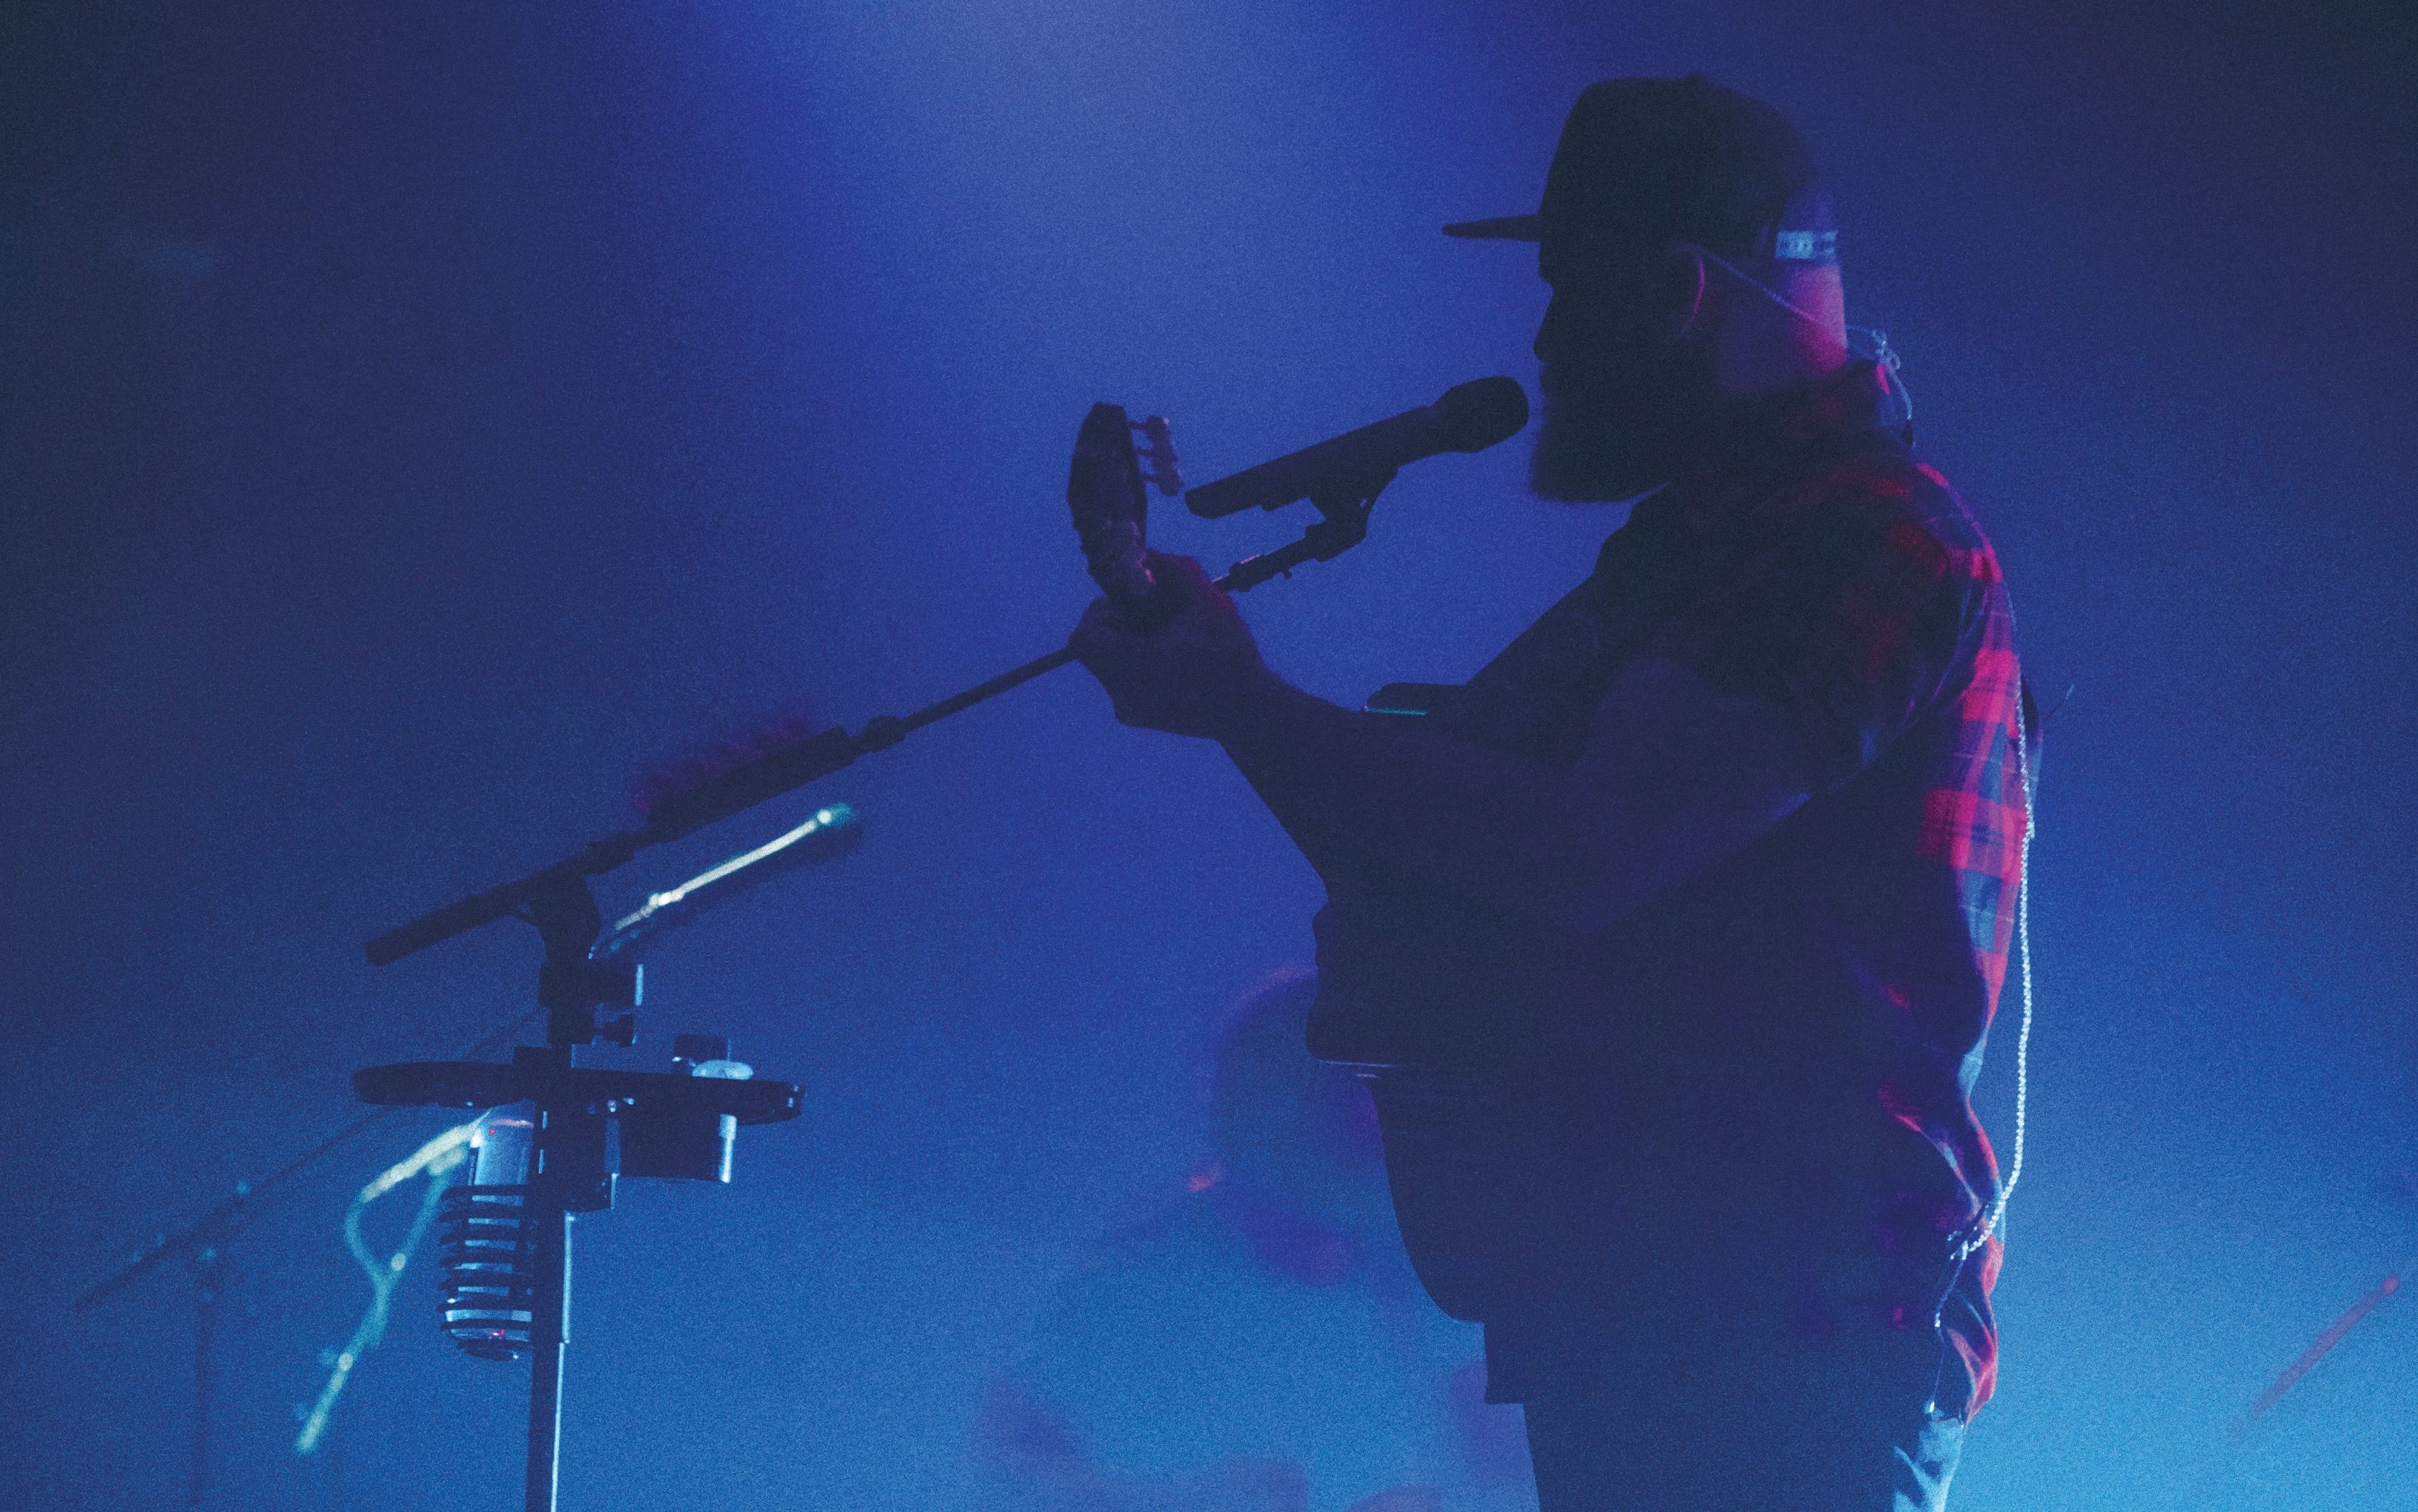 After an amazing show at Truist Park in June, check out Zac Brown Band’s other tour stops at zacbrownband.com. PHOTO BY TYLER LORD